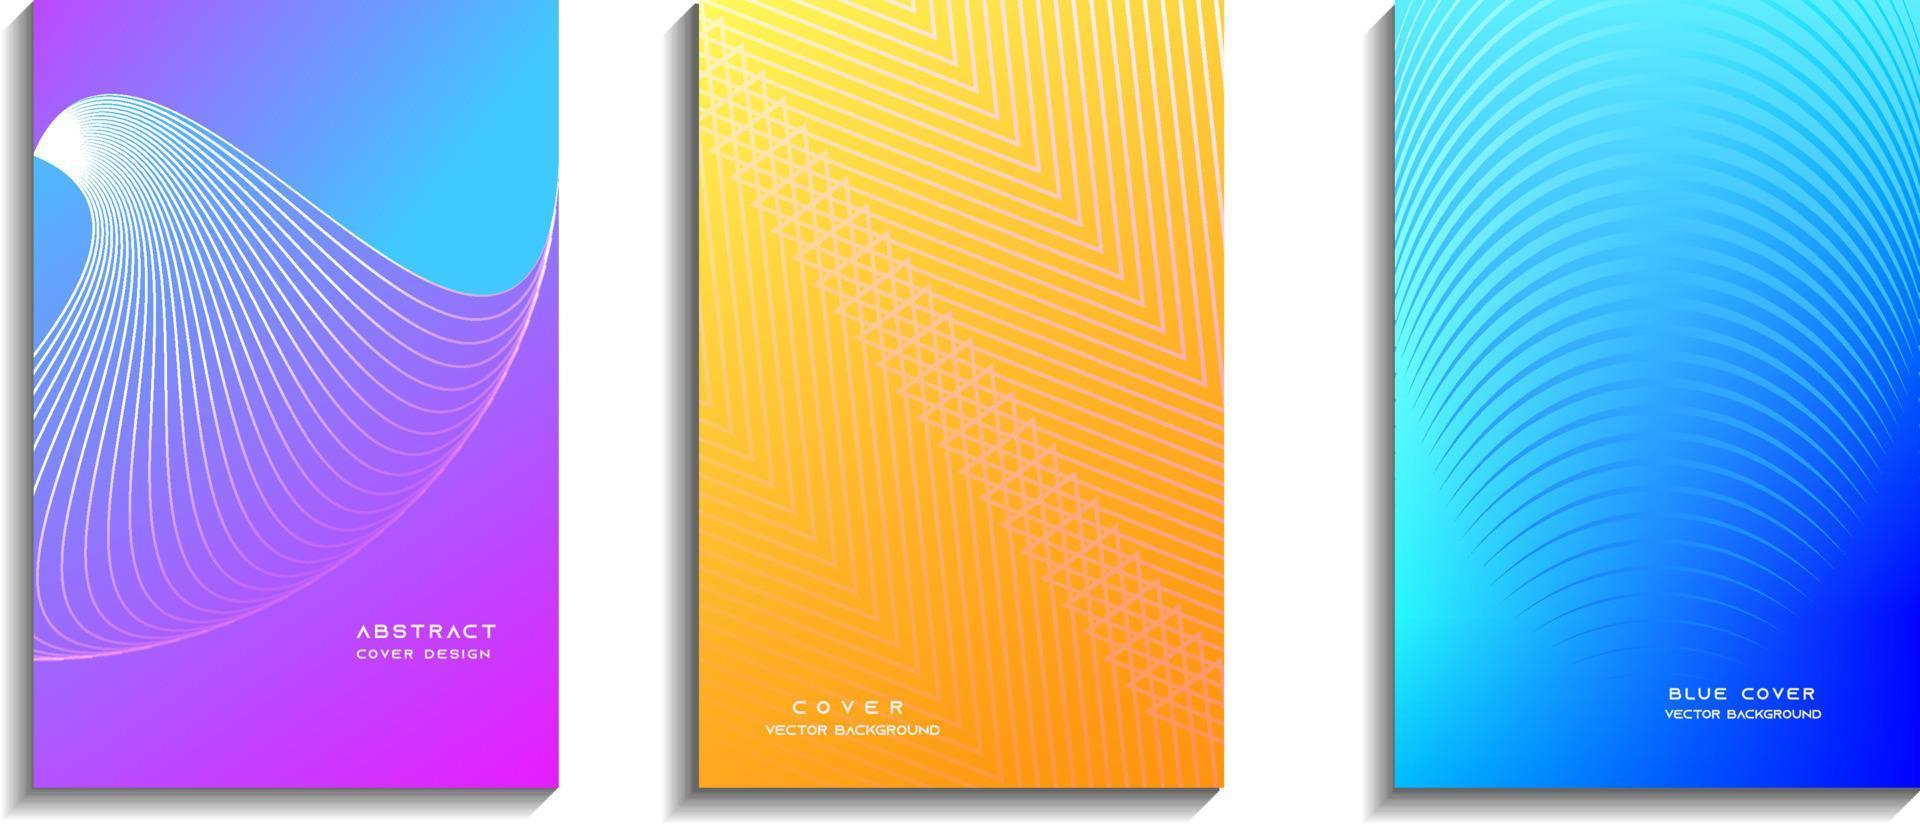 ech cover templates set. Geometric lines patterns. Linear backgrounds for cataloges, corporate brochures. Lines texture, header title elements. Annual report covers. vector